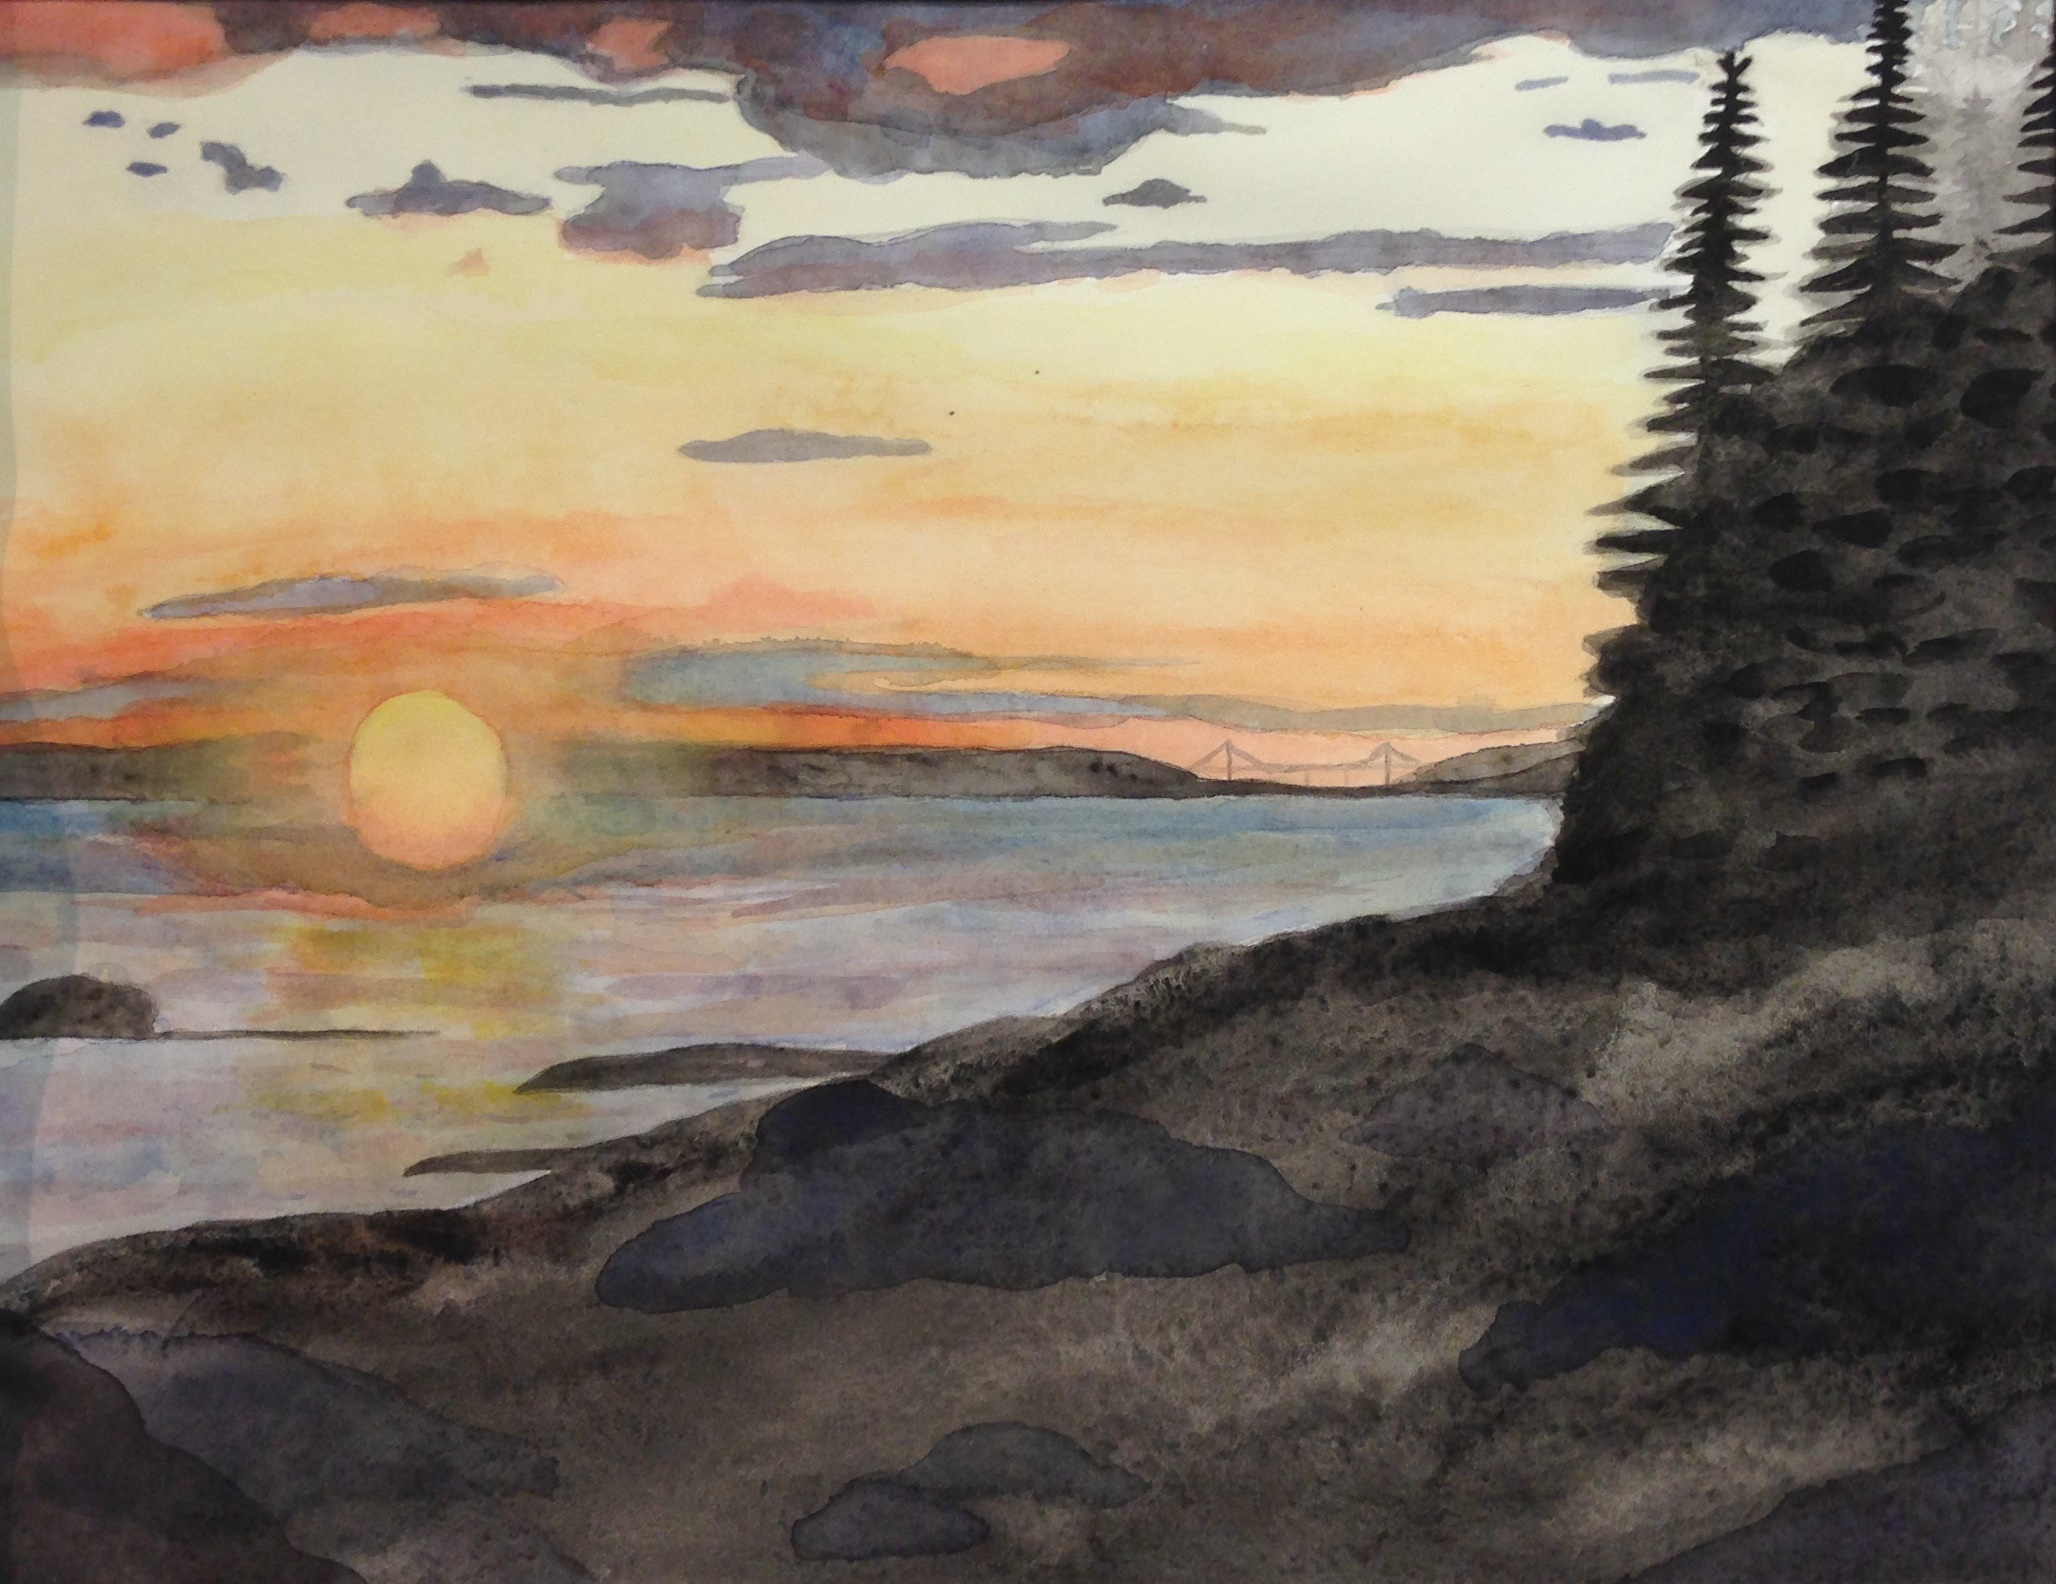 Landscapes painted by Husson University students will be a part of the 6th Hart Open Studio Event.